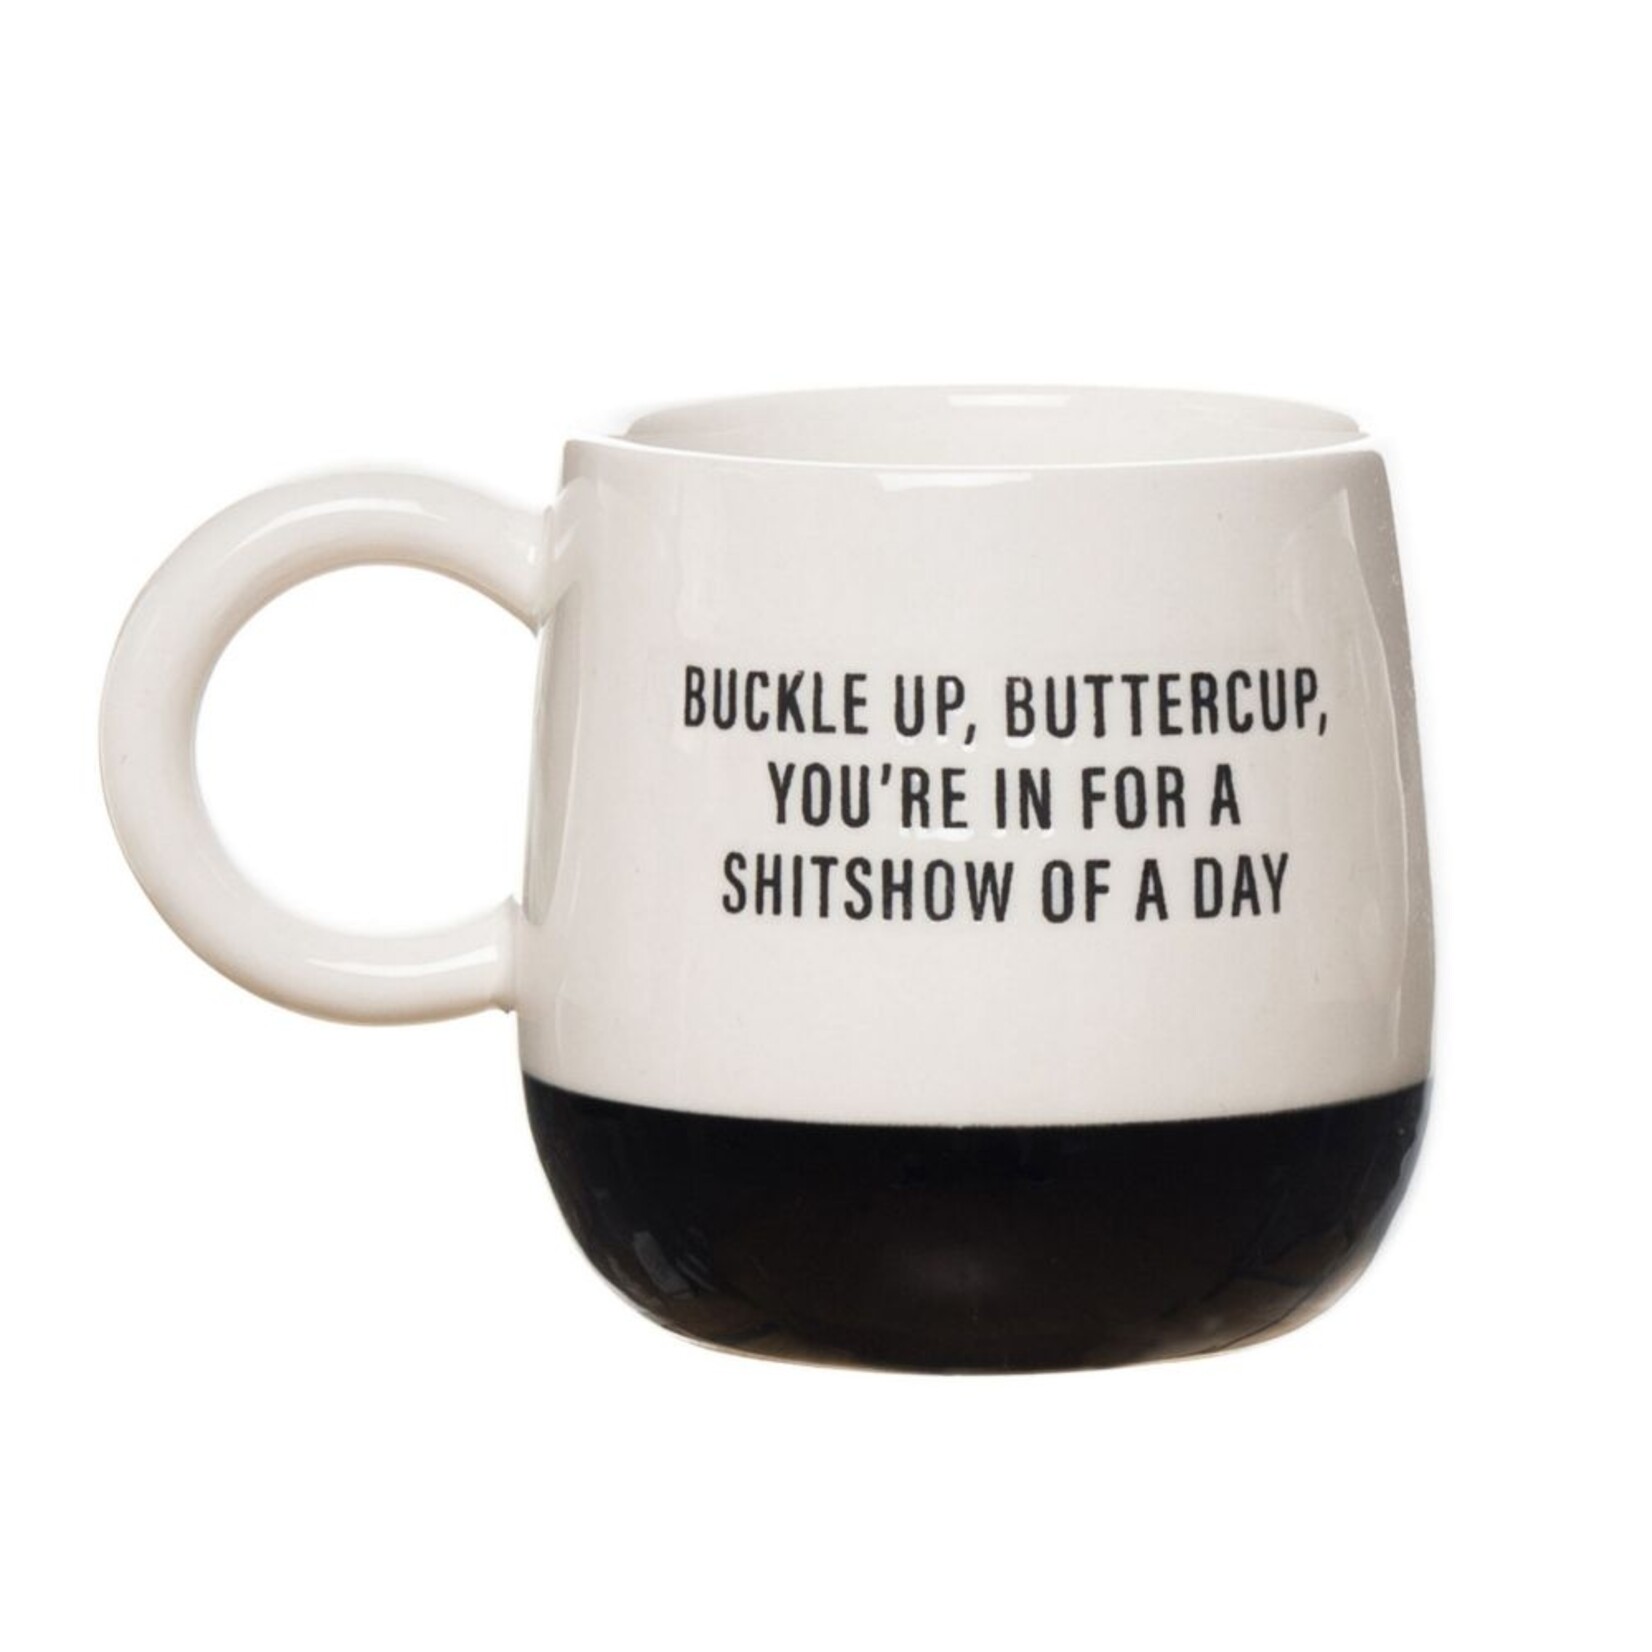 Totalee Gift Buckle Up Buttercup Ceramic Mug